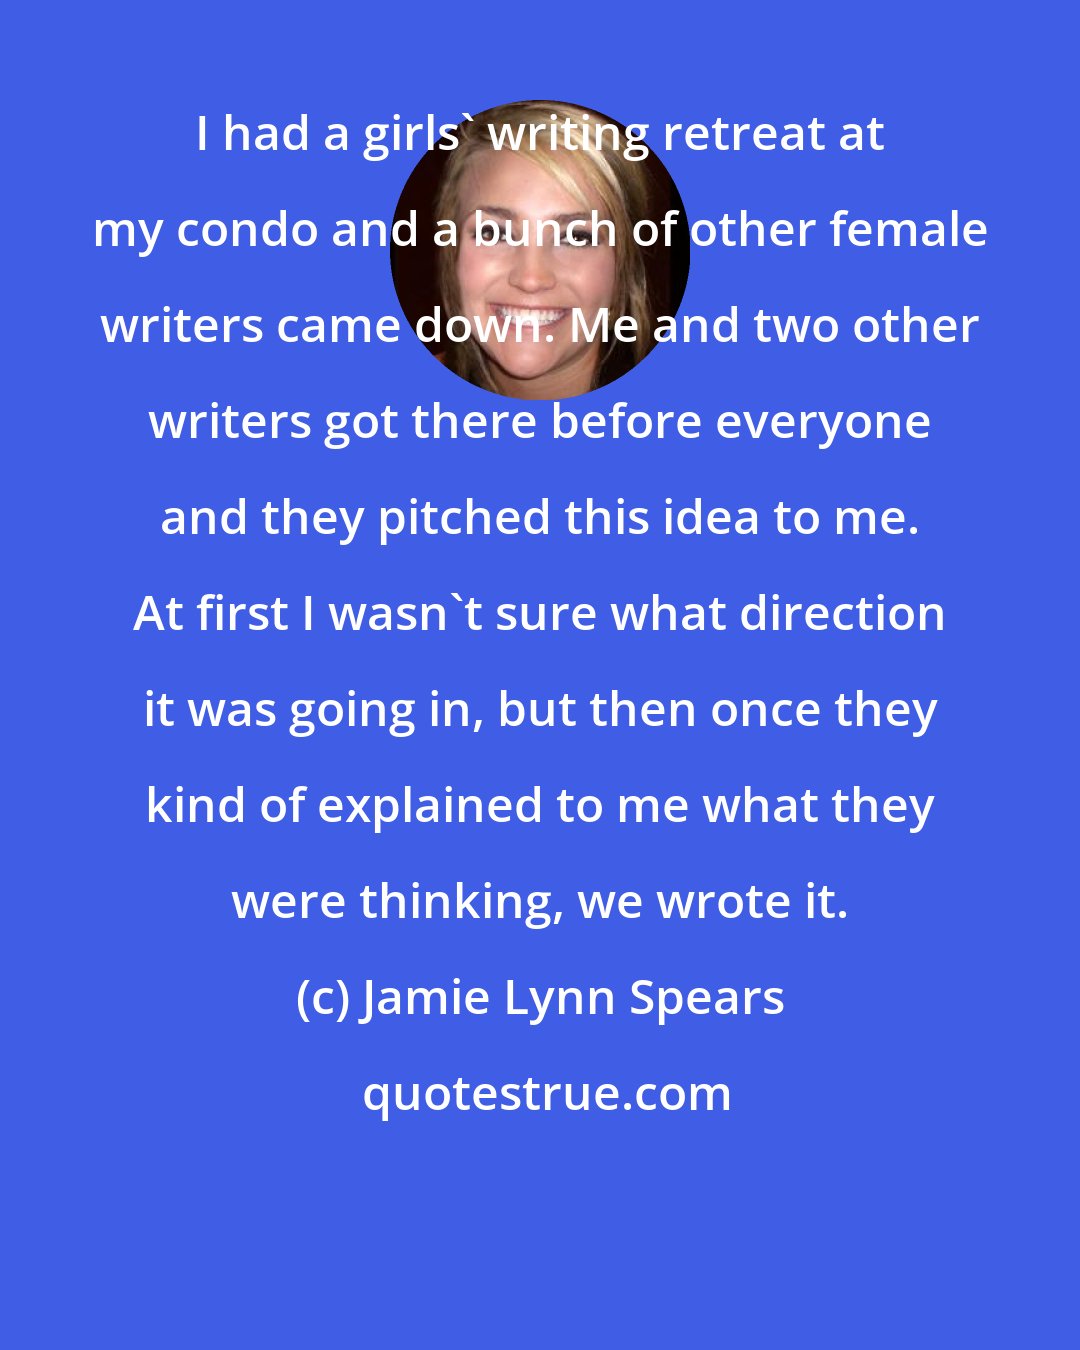 Jamie Lynn Spears: I had a girls' writing retreat at my condo and a bunch of other female writers came down. Me and two other writers got there before everyone and they pitched this idea to me. At first I wasn't sure what direction it was going in, but then once they kind of explained to me what they were thinking, we wrote it.